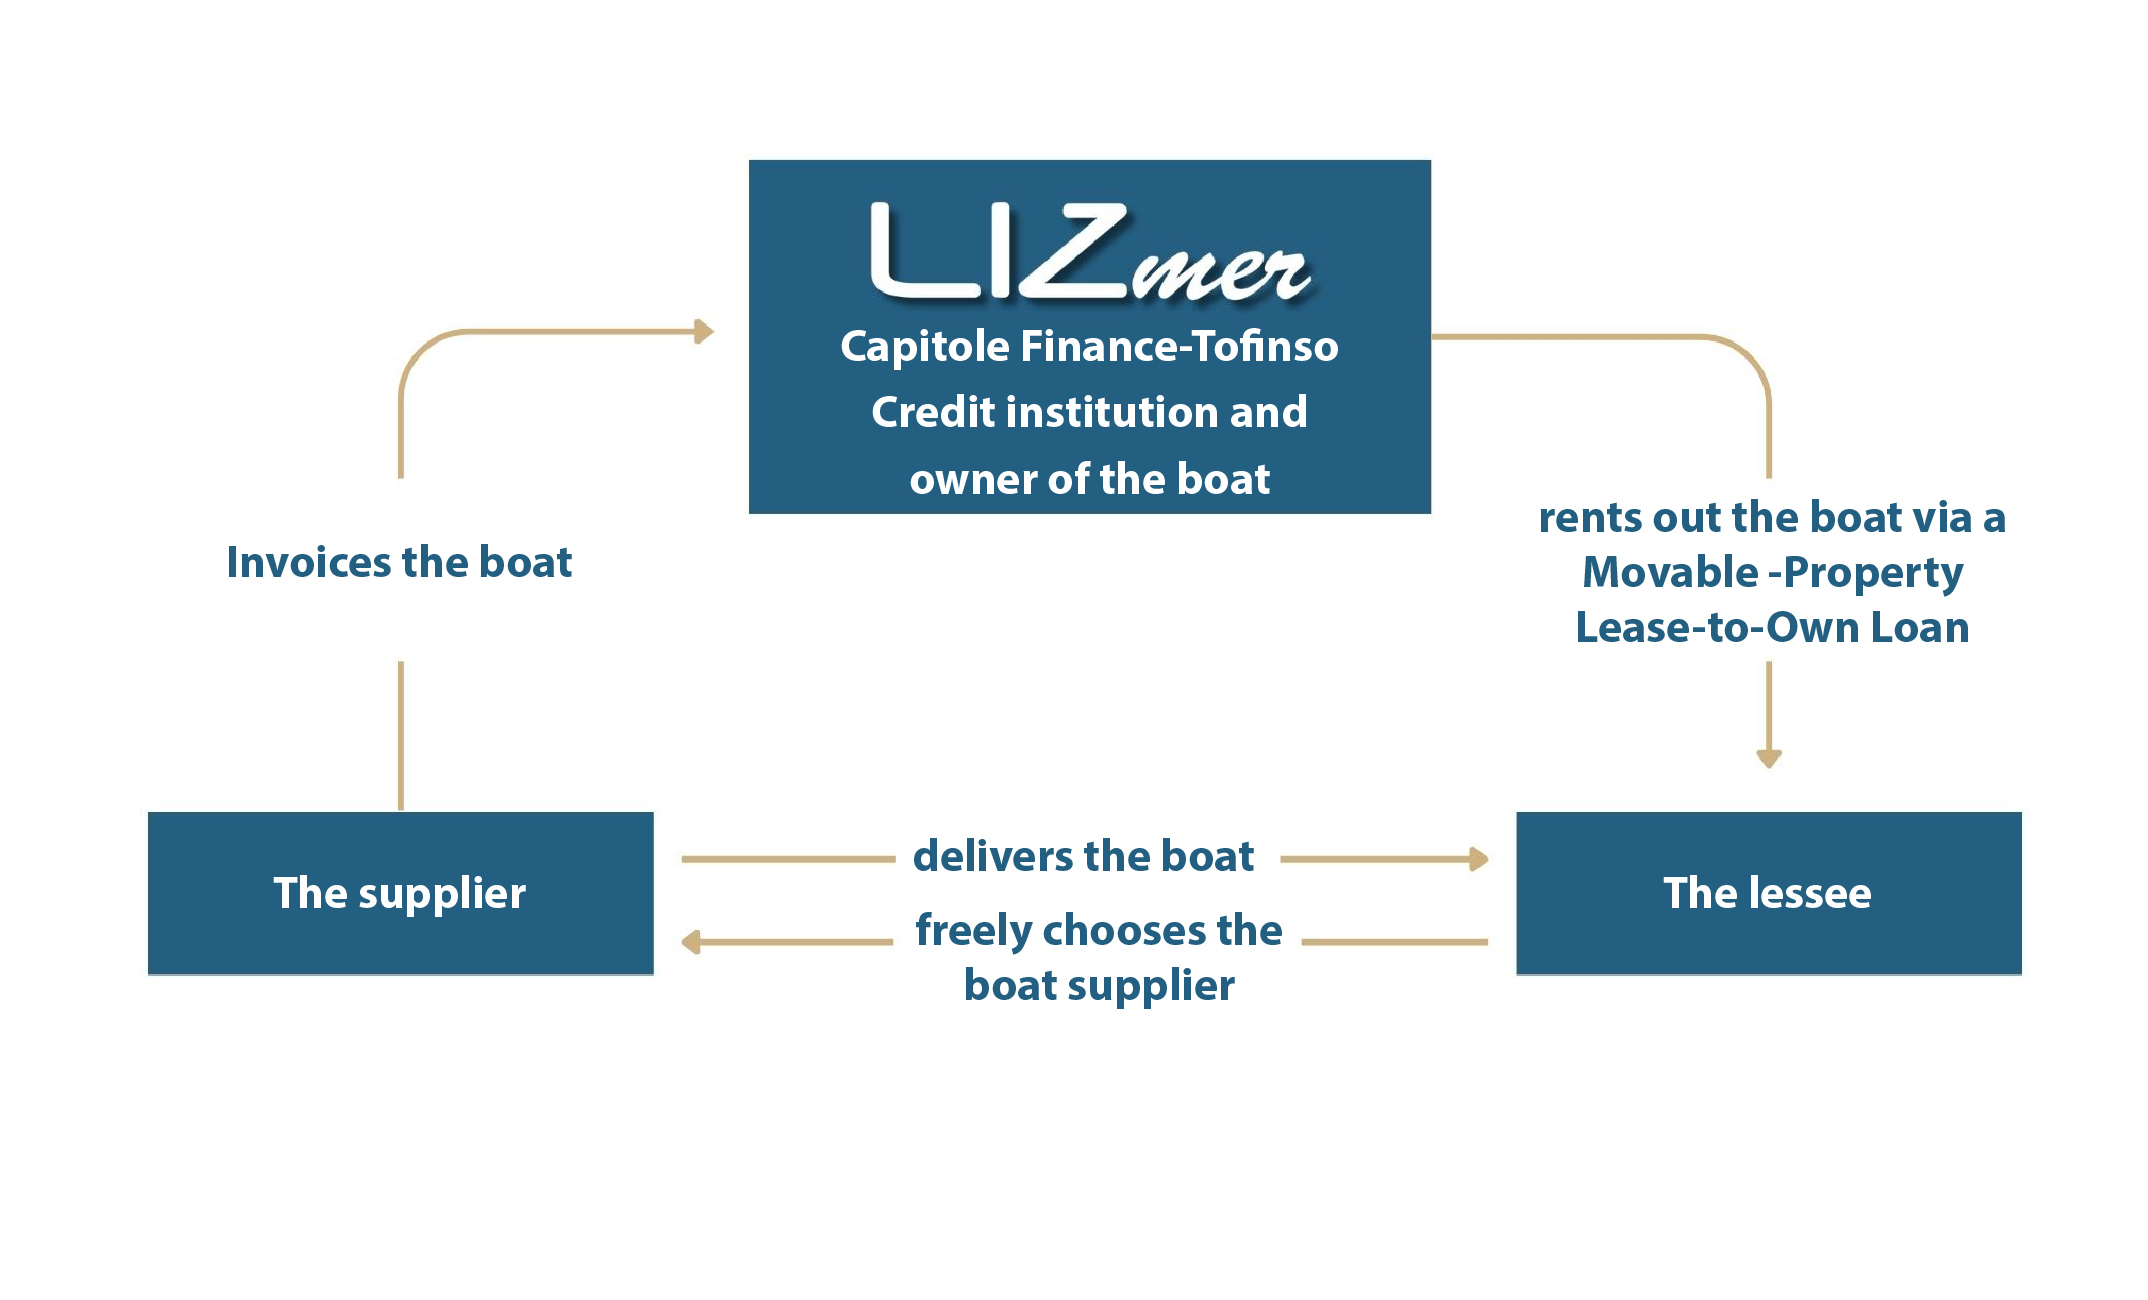 The LIZmer Movable Property Lease-to-Own Loan